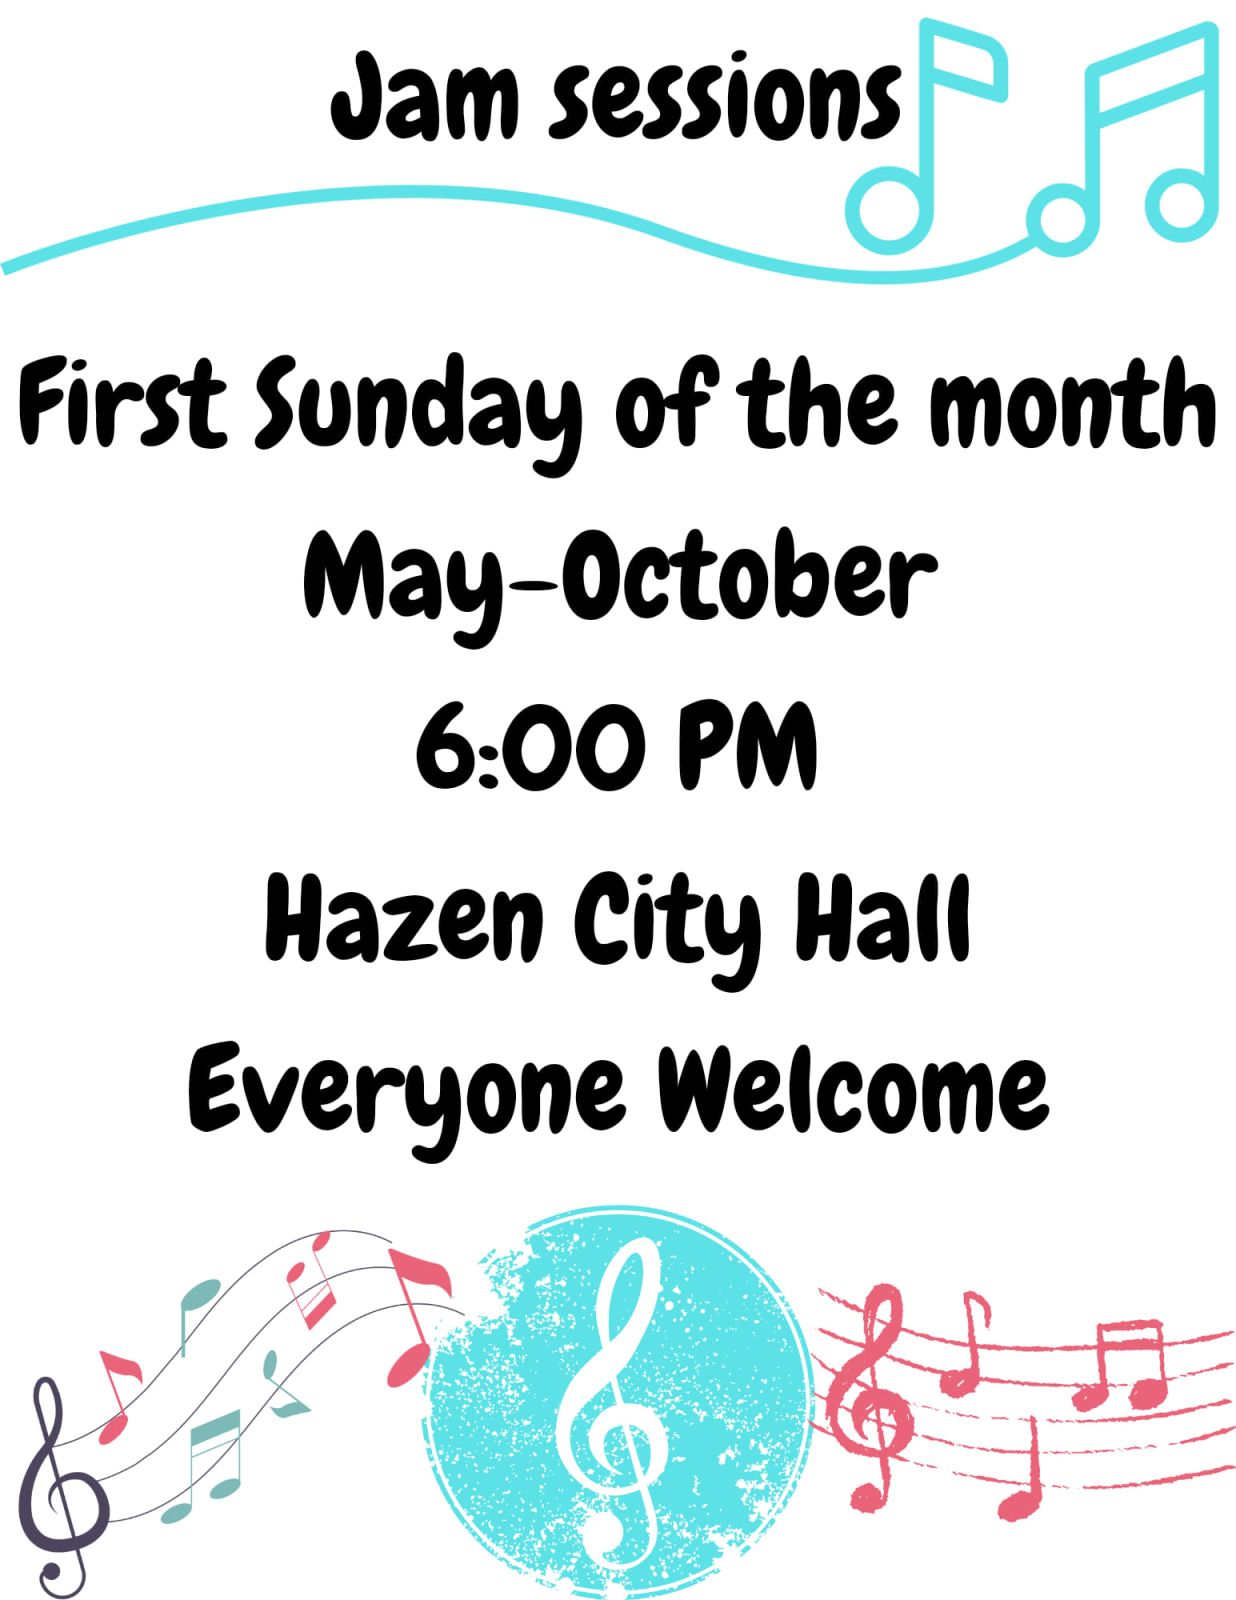 Event Promo Photo For Jam Session at Hazen City Hall